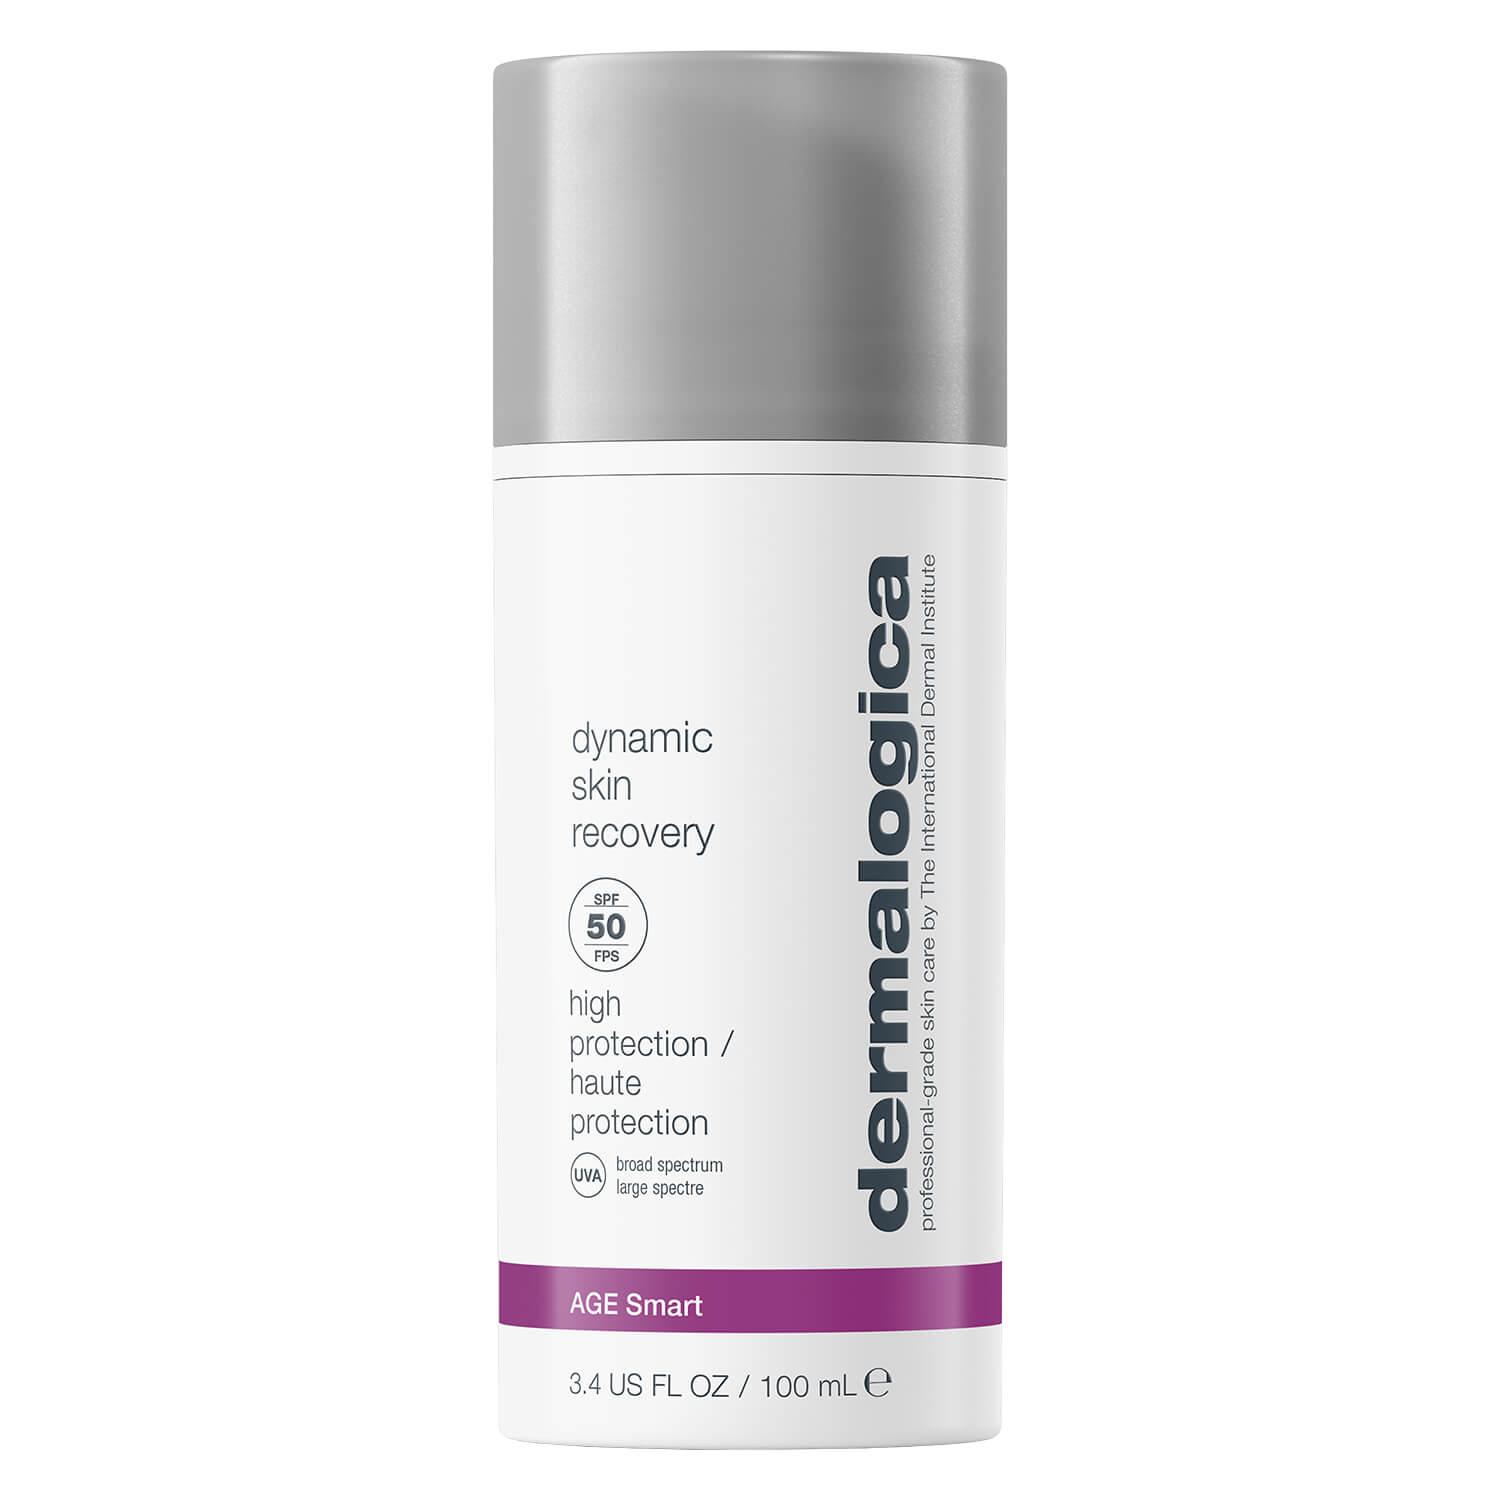 AGE Smart - Dynamic Skin Recovery SPF 50